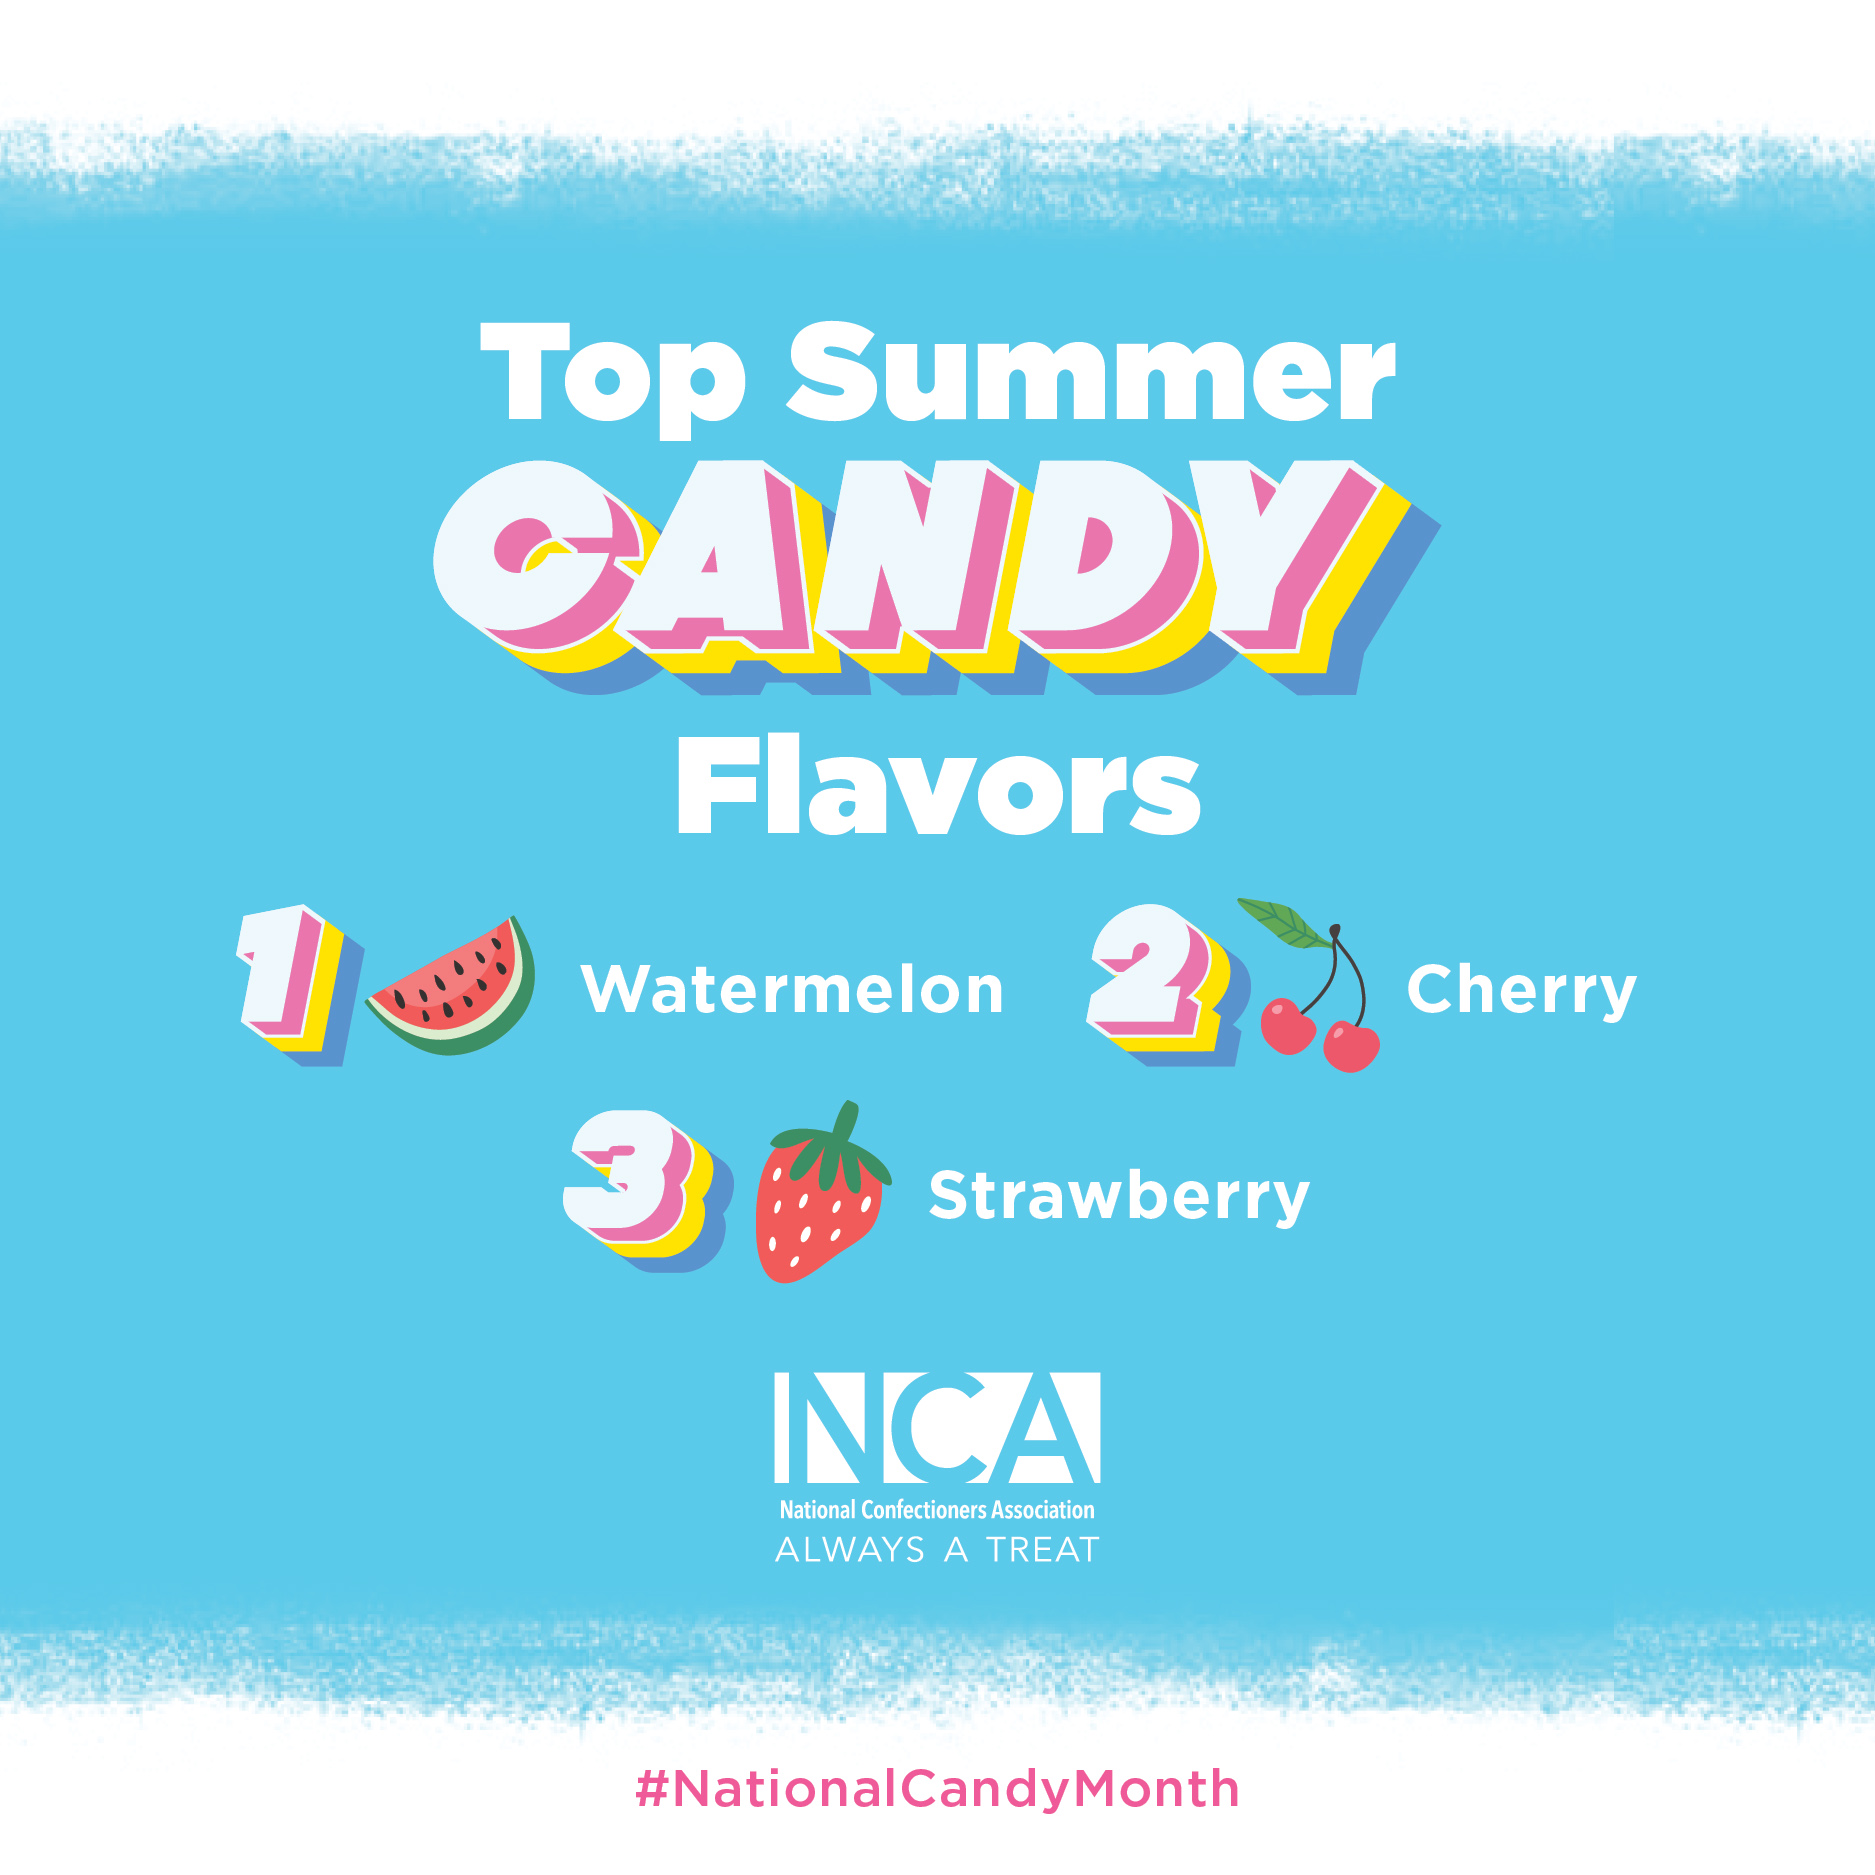 Top Summer Candy Flavors